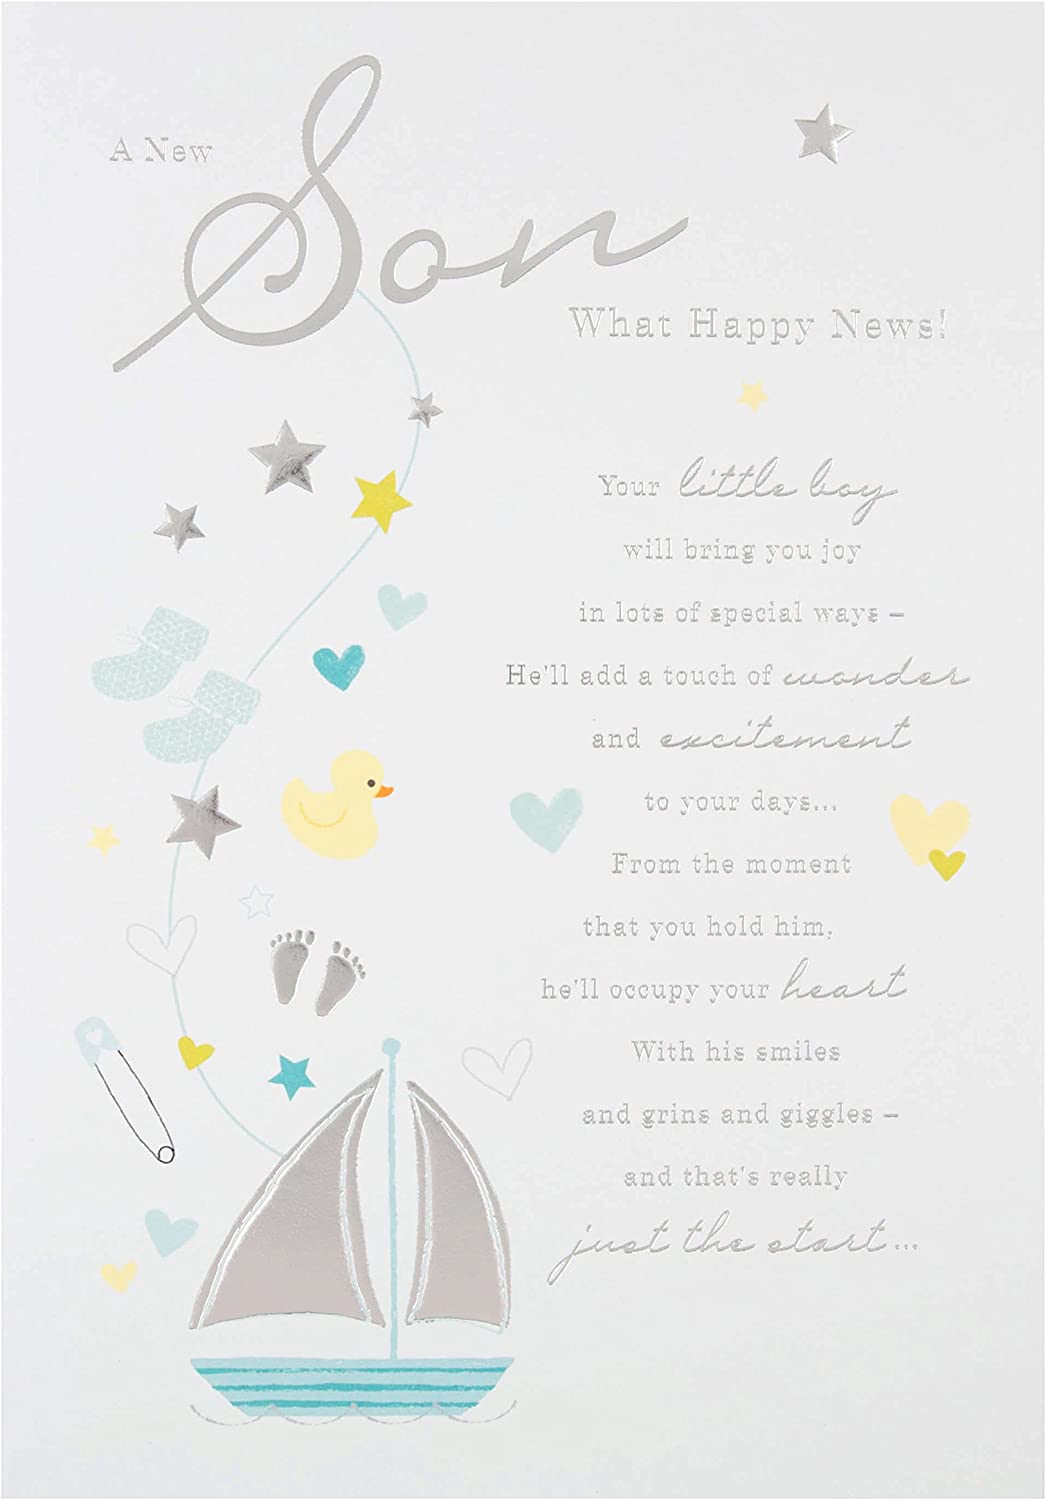 New Baby Boy Card - "Just the Start" of New Happiness